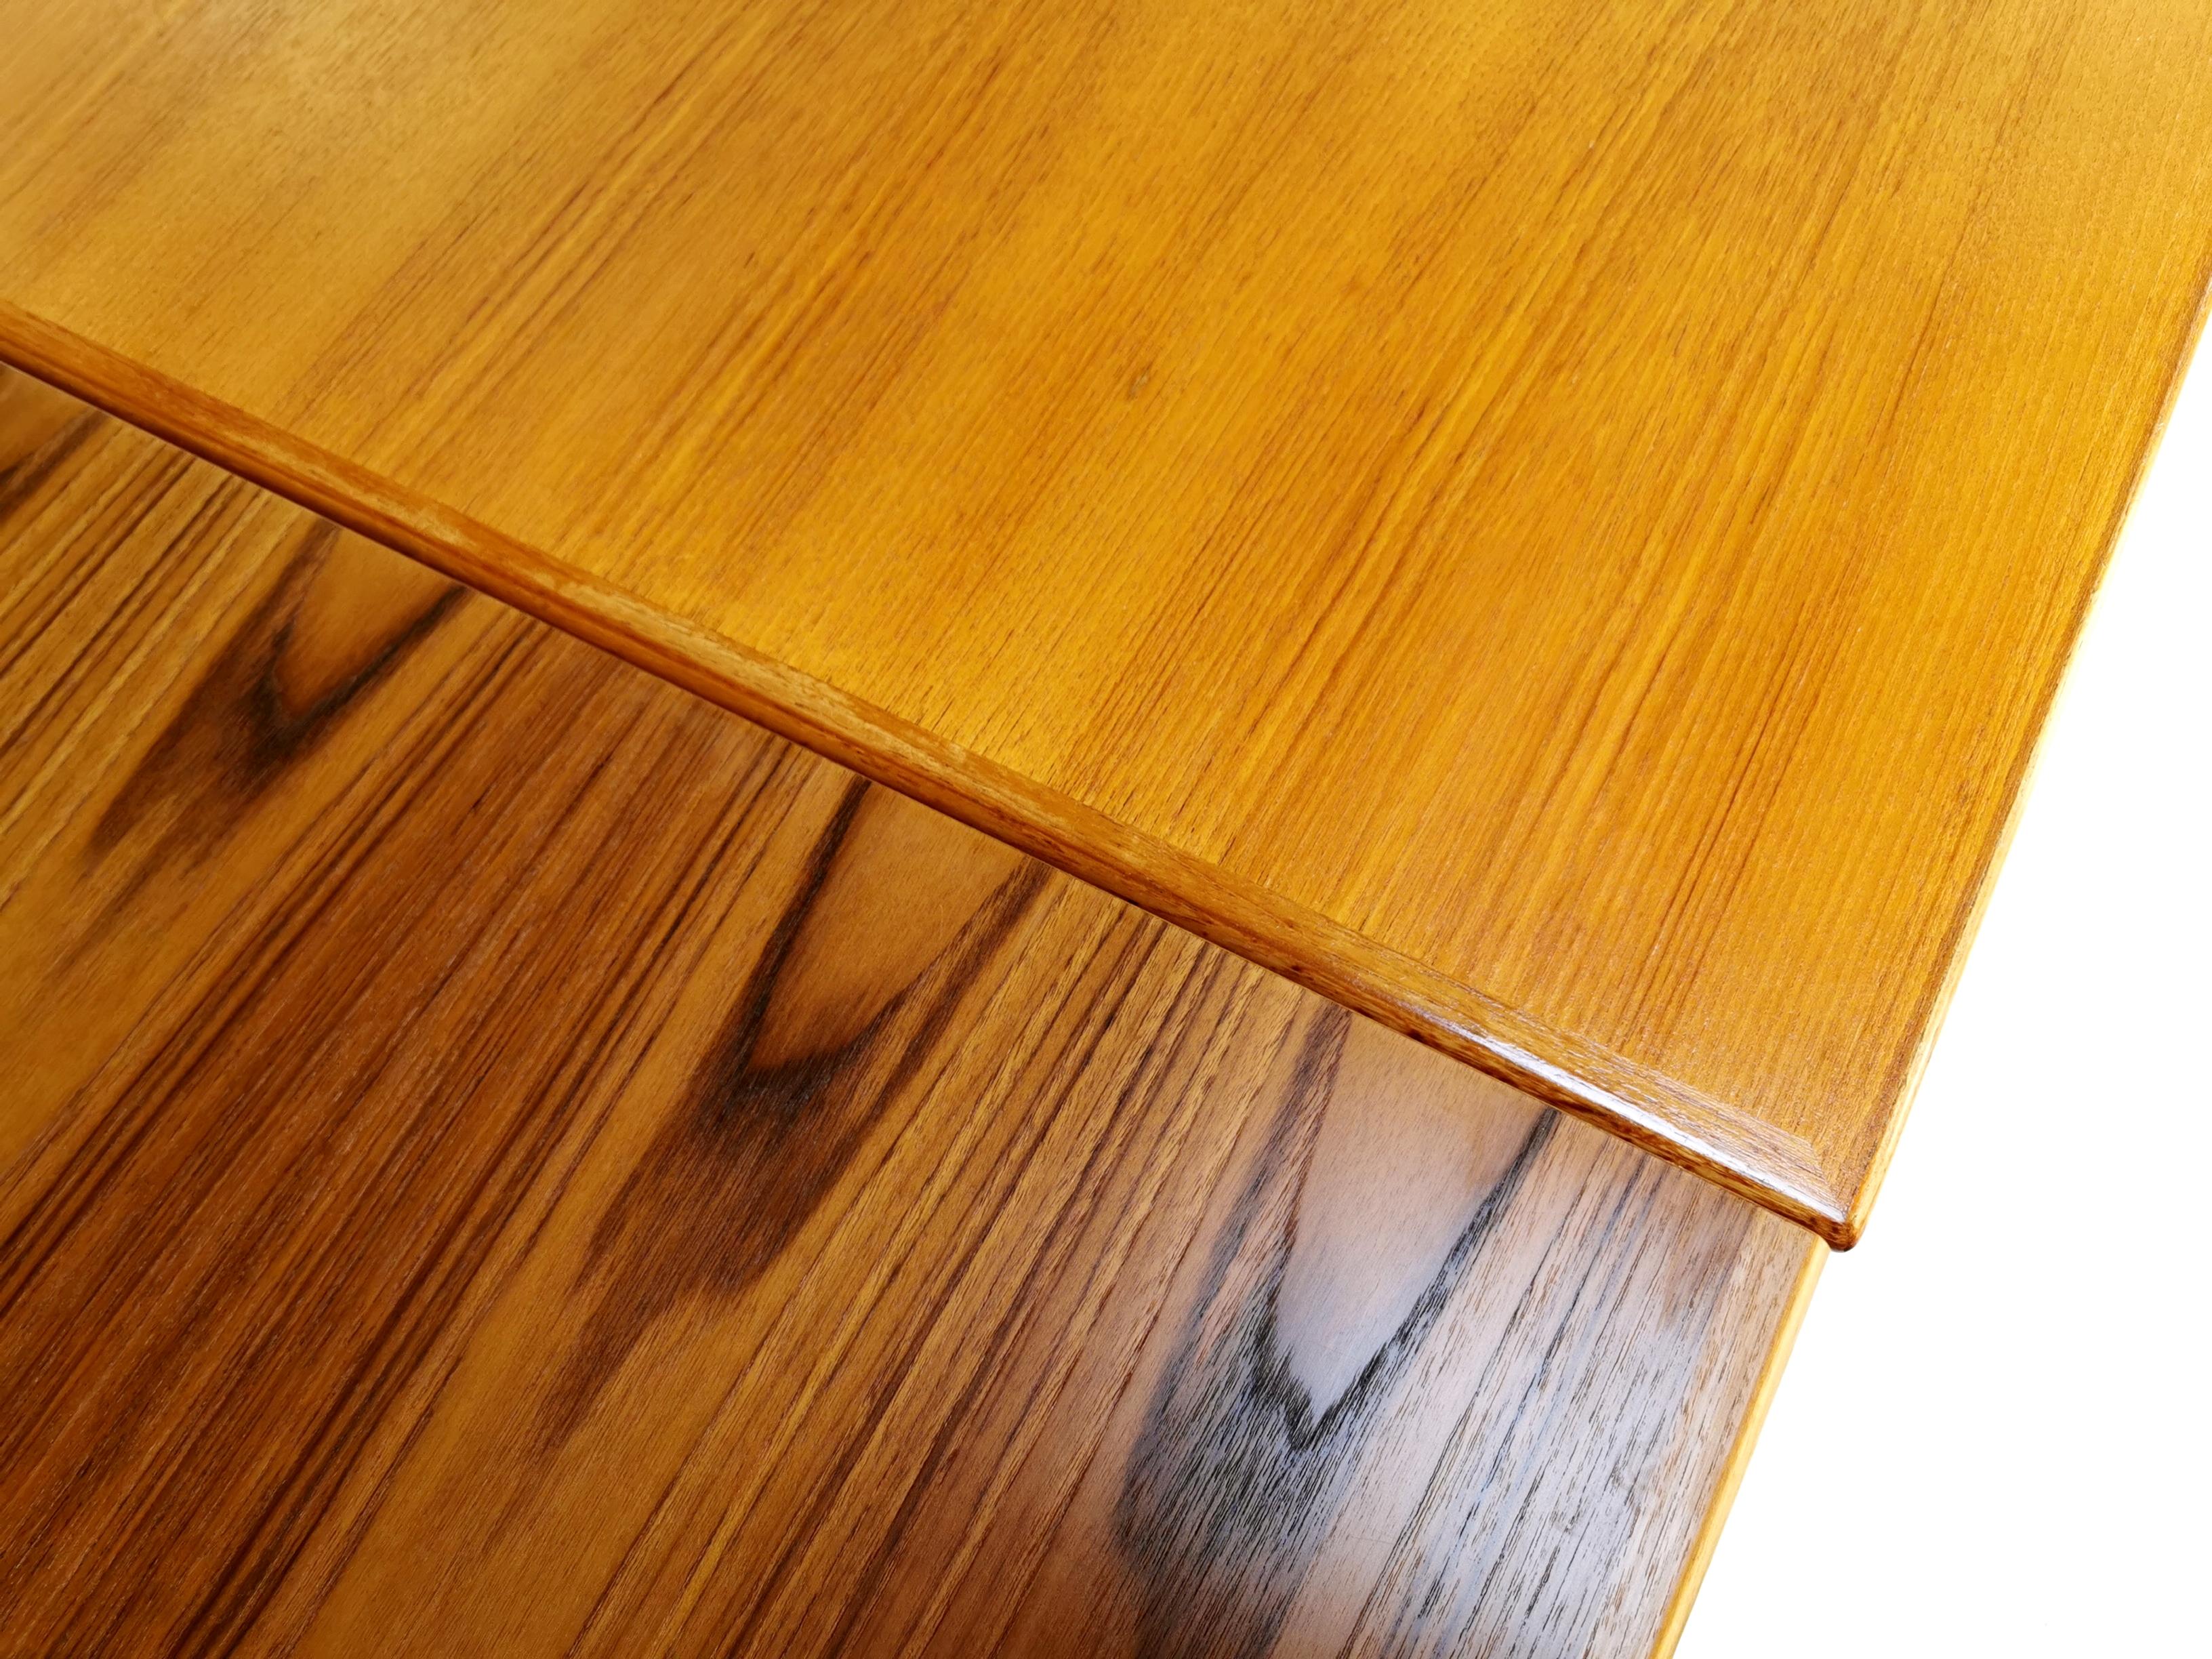 Danish teak extending dining table

A 1970s teak dining table by Danish company, AR.

Light, honey toned teak. 

Extends substantially, with the two additional leaves hidden under the tabletop, 

circa 1960s, Danish.

Dimensions (cm):? 92